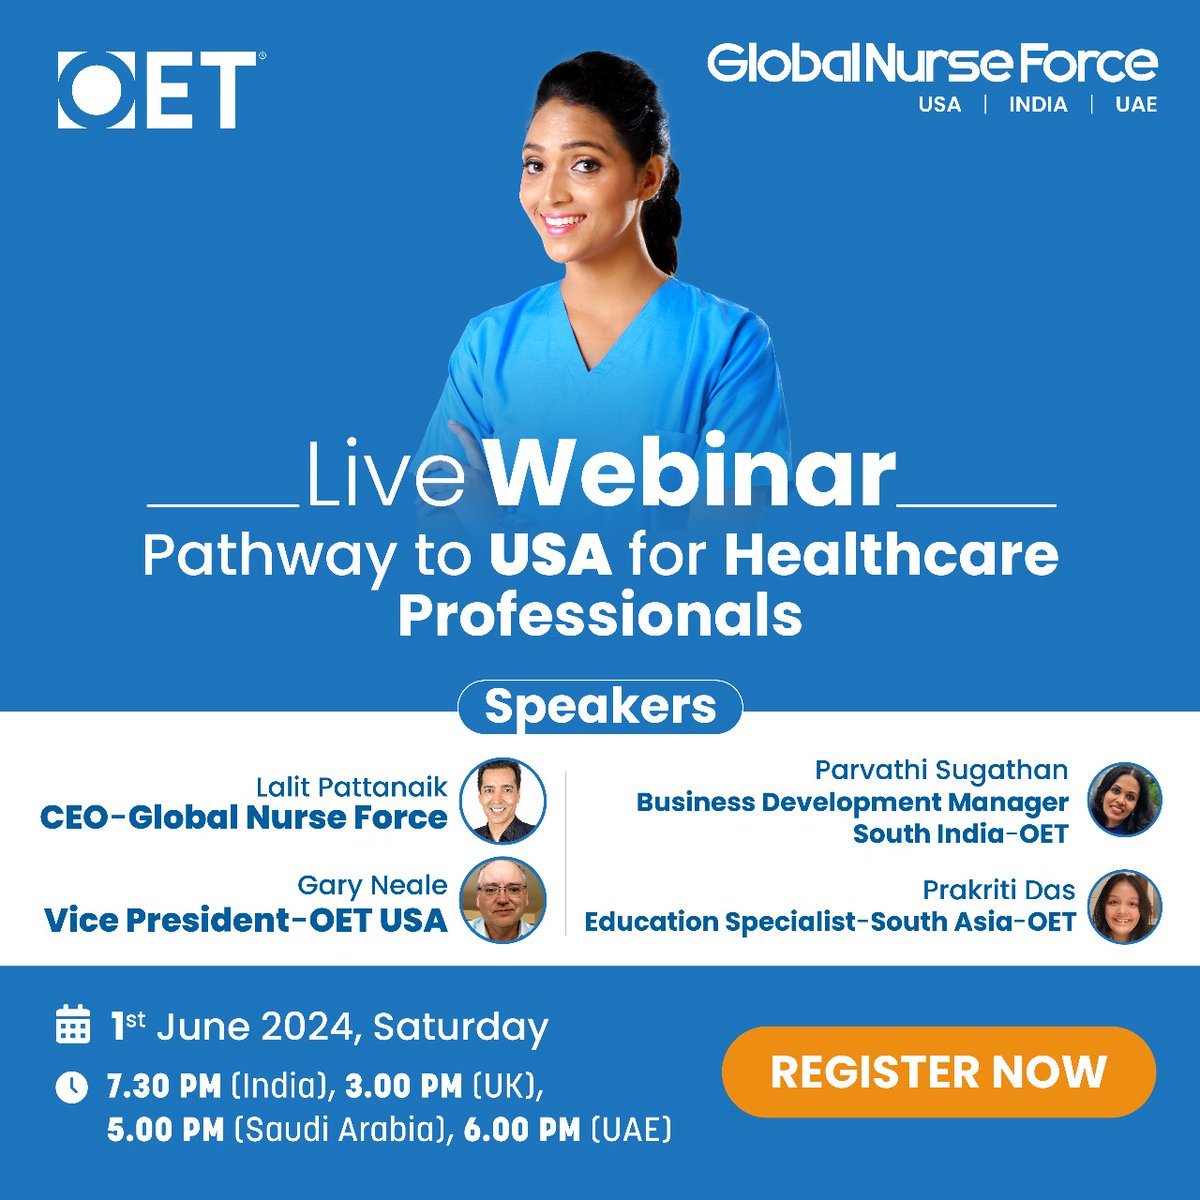 Dreaming of working as a registered nurse in the USA?Join our live webinar, conducted in collaboration with OET and learn everything you need to know to achieve your USA nursing dream!👉Click the link zurl.co/DjZY to Apply
#NursingDreams #RegisteredNurse